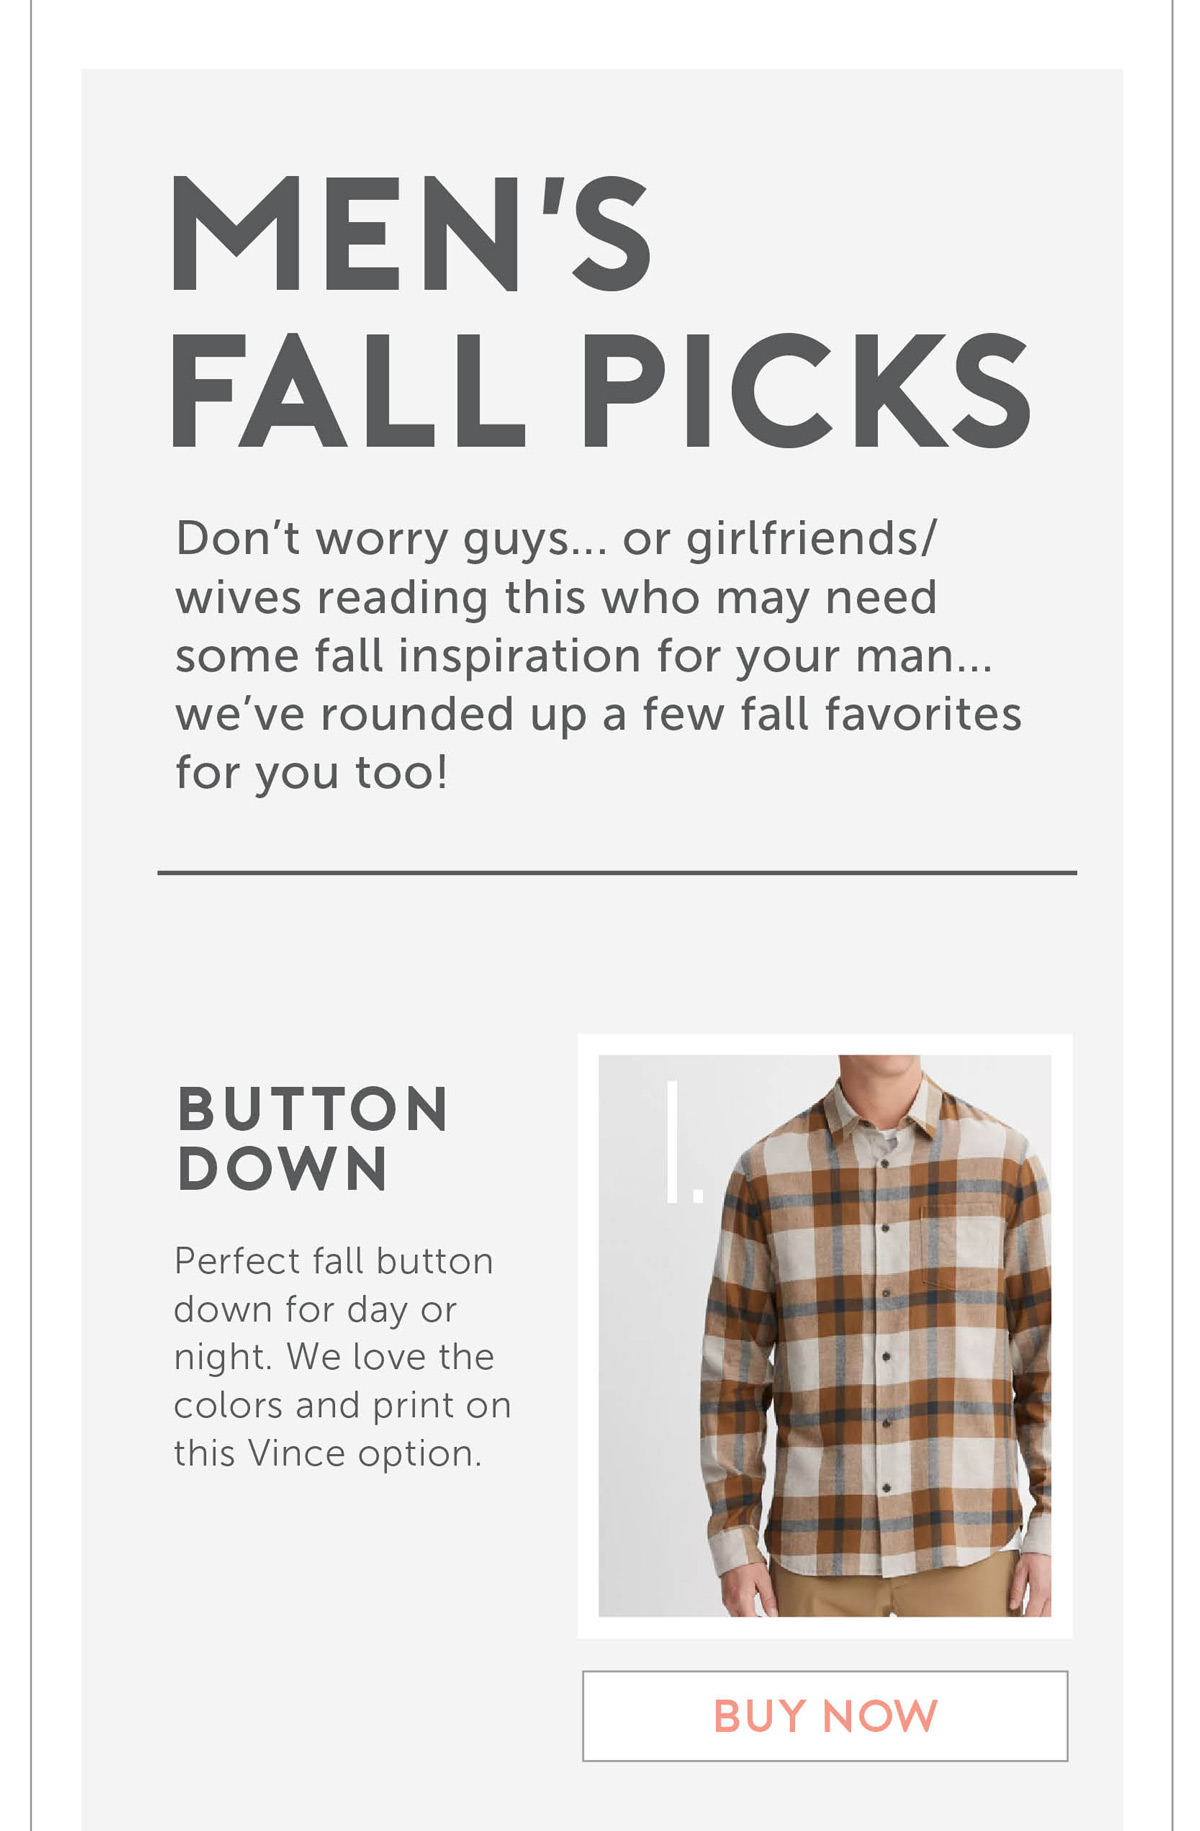 Men’s Fall Picks Don’t worry guys... or girlfriends/wives reading this who may need some fall inspiration for your man...we’ve rounded up a few fall favorites for you too! Perfect fall button down for day or night. We love the colors and print on this Vince option.